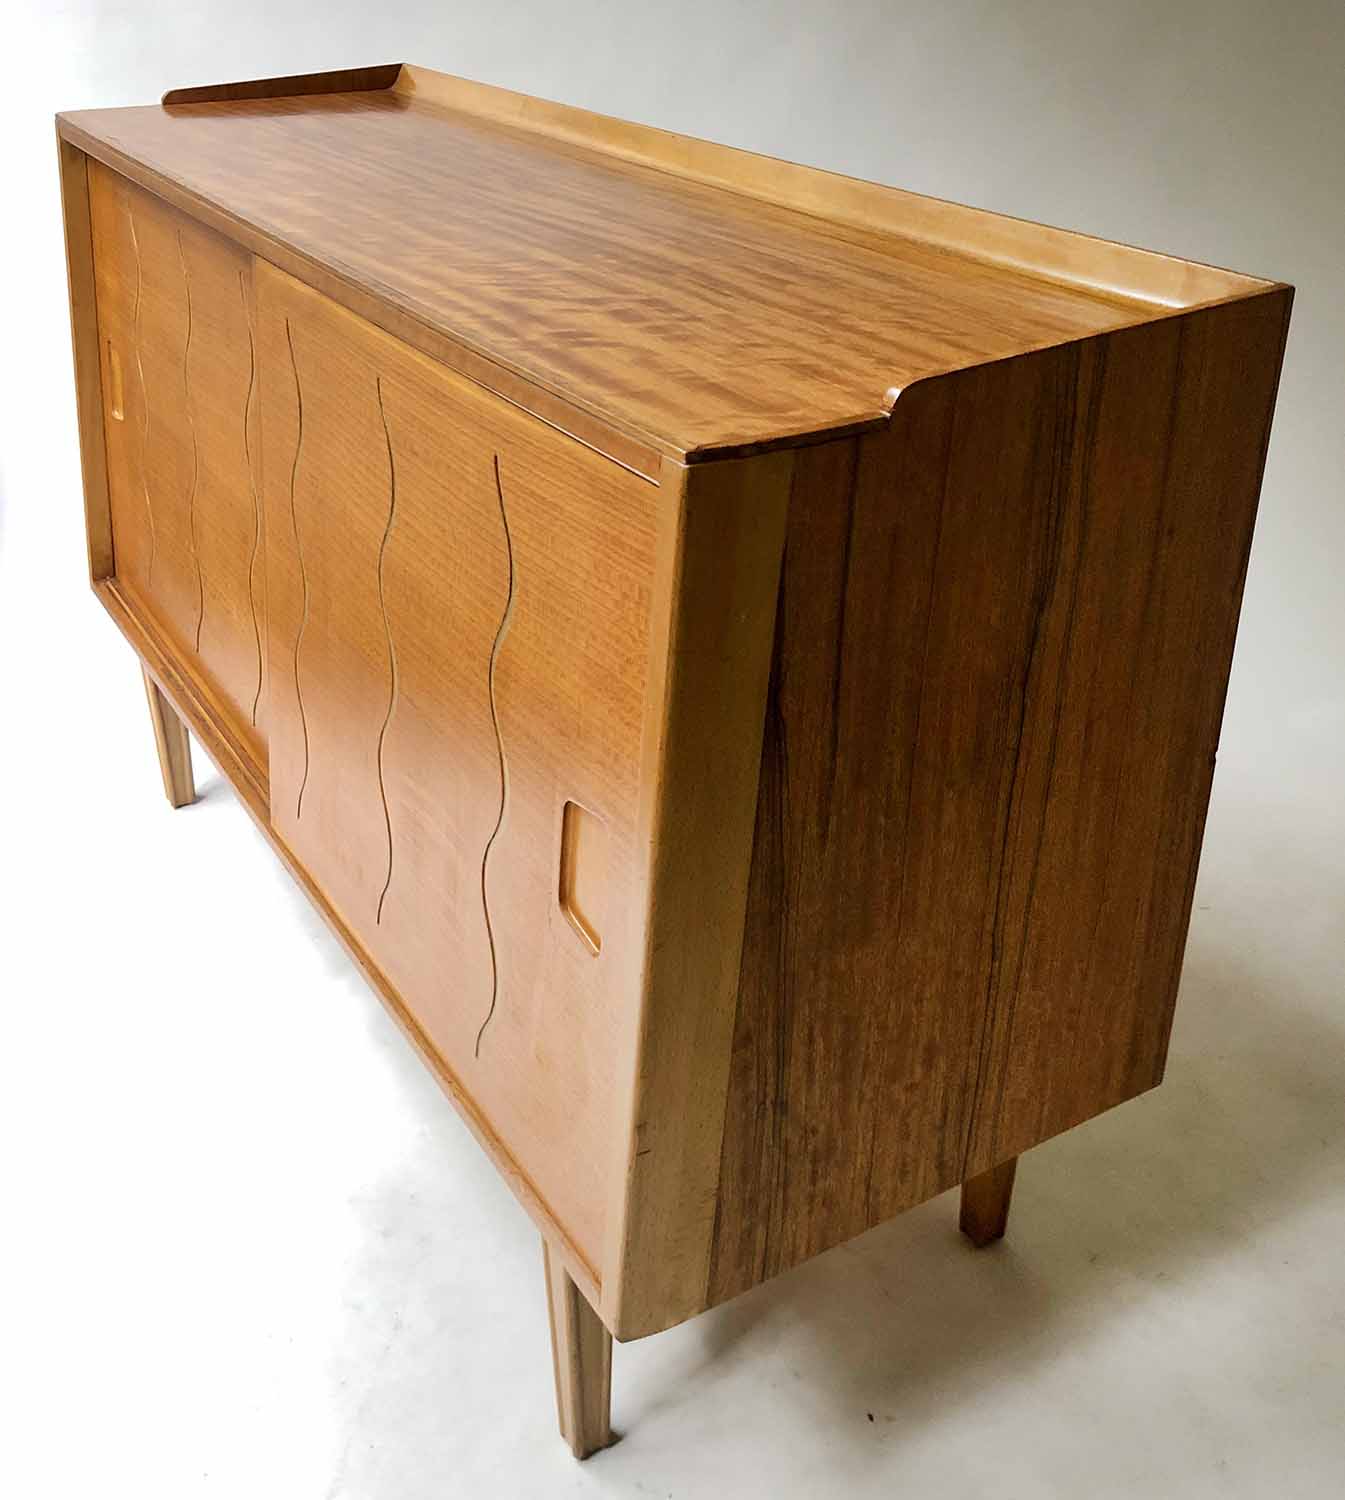 SIDEBOARD BY IAN AUDSLEY FOR G W EVANS, mid 20th century walnut and elm with sliding doors, - Image 6 of 6